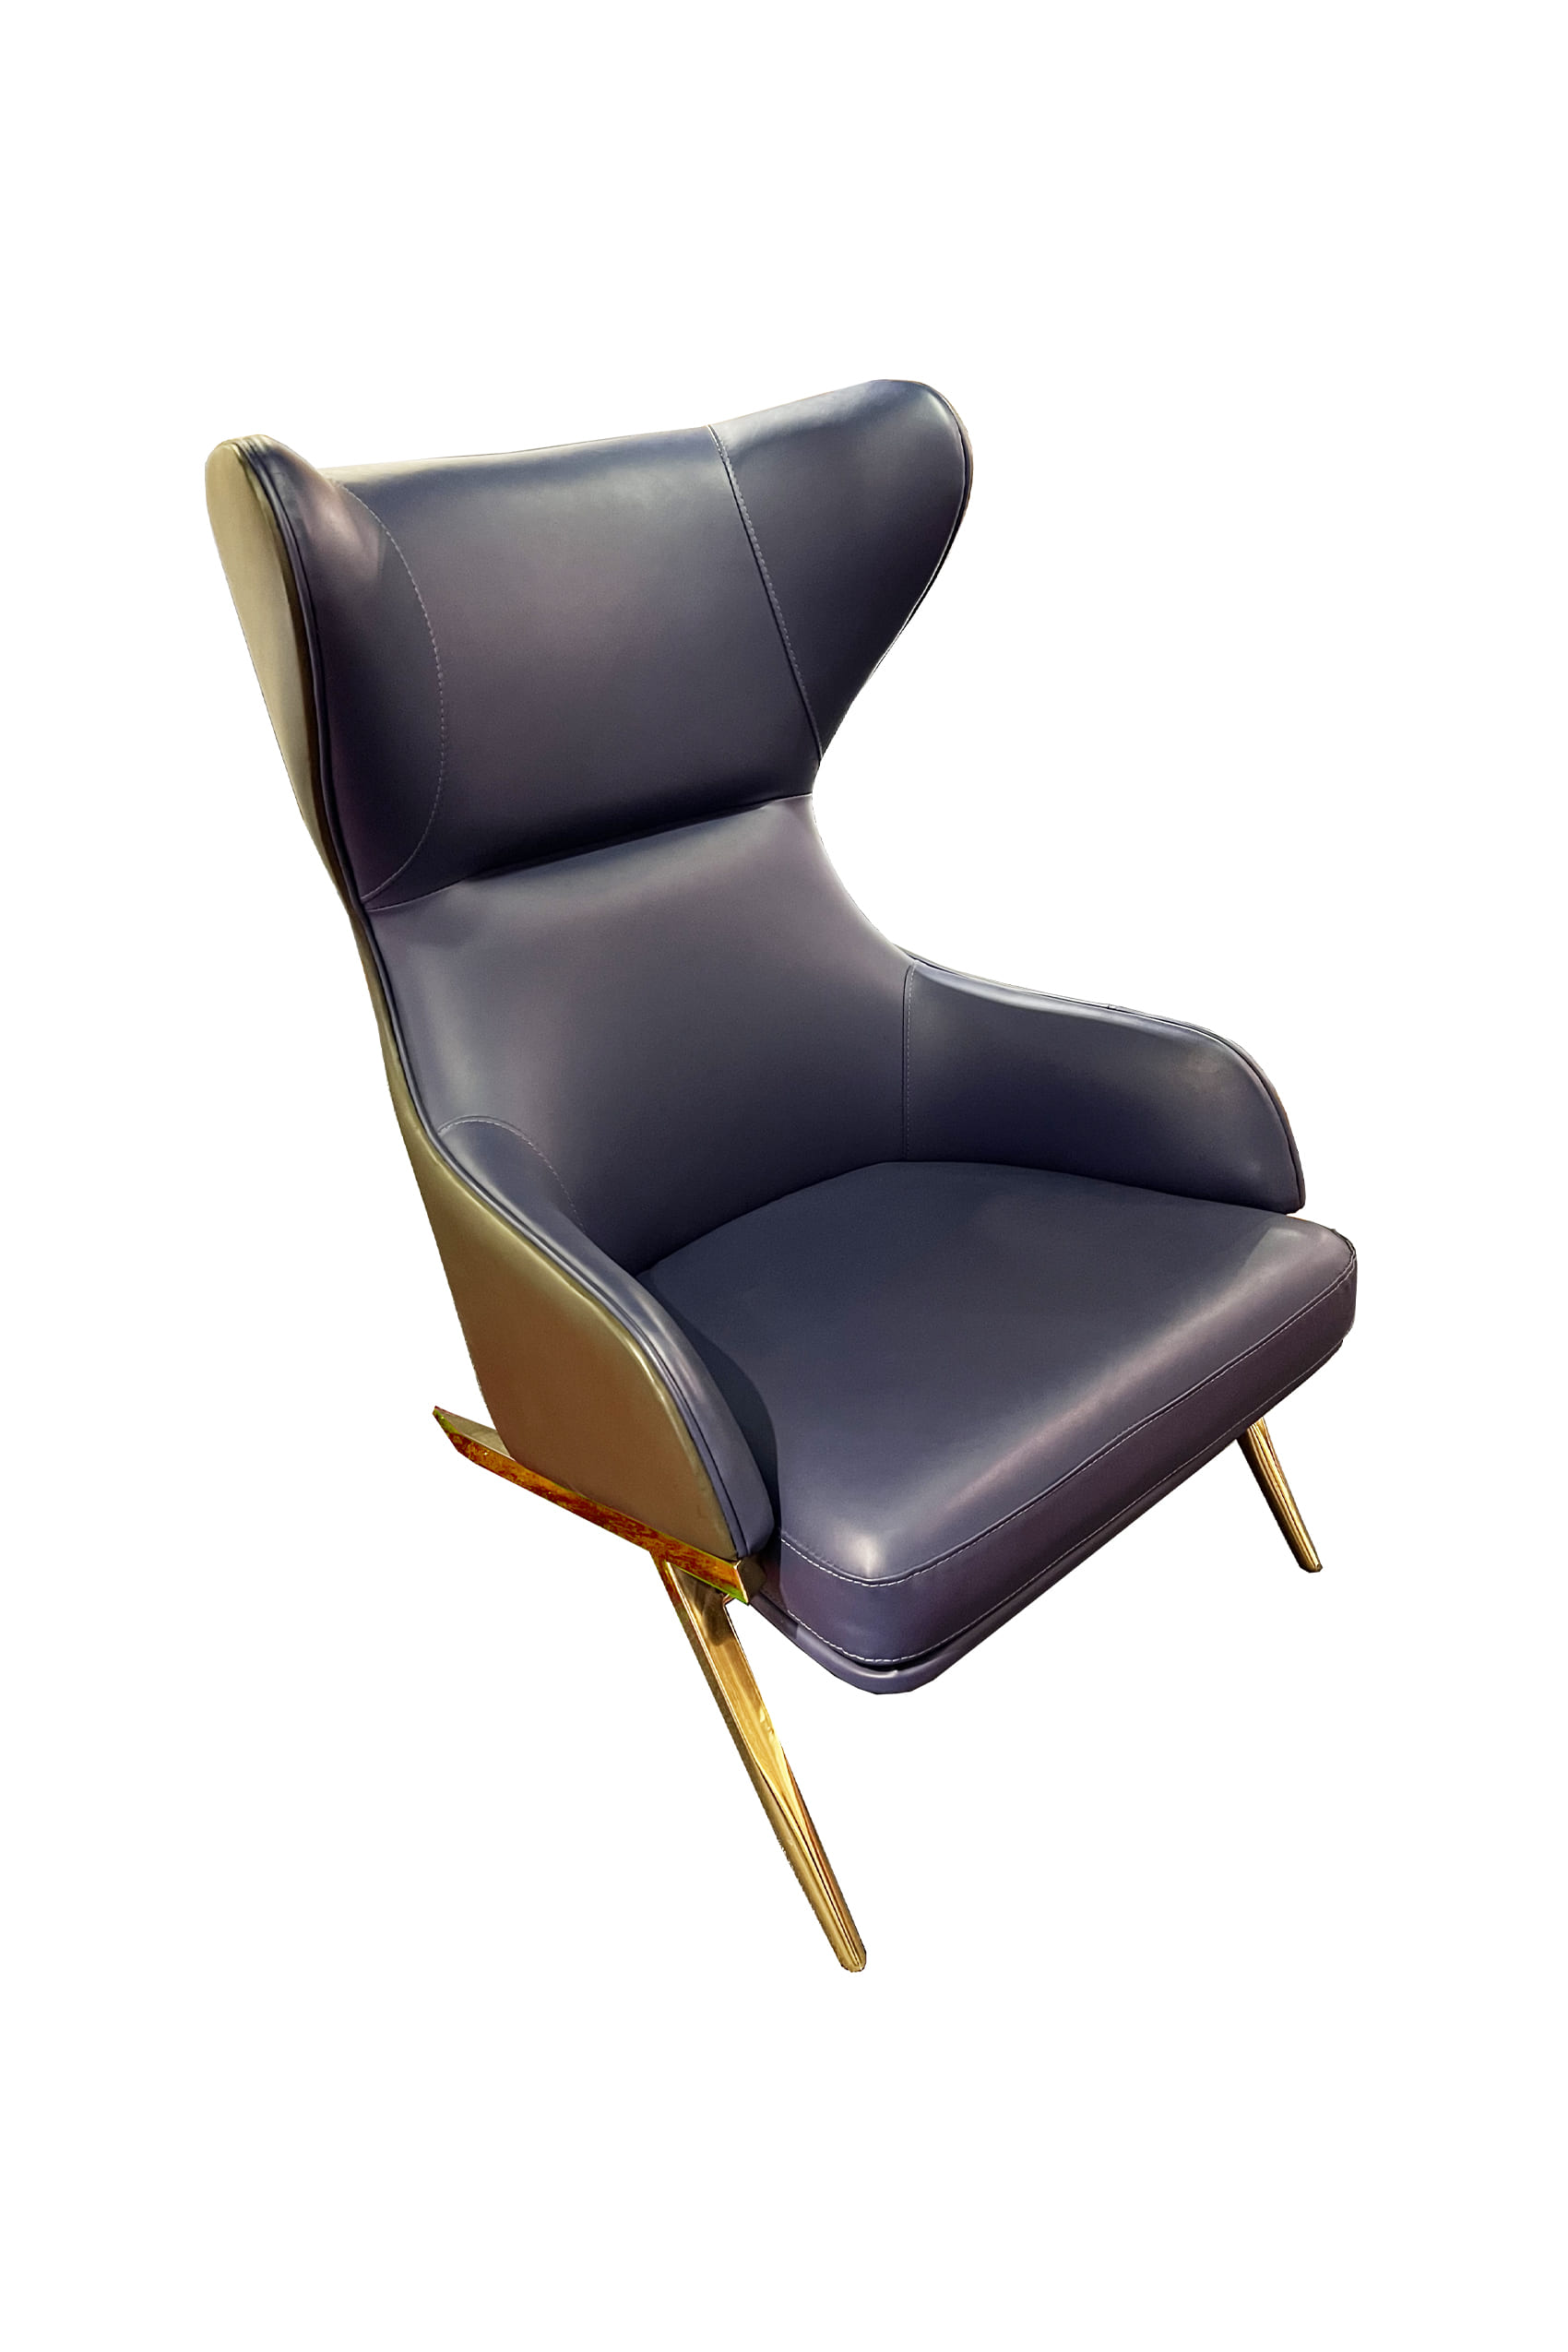 Lodrino Relax Chair - TheFurniture.com.sg